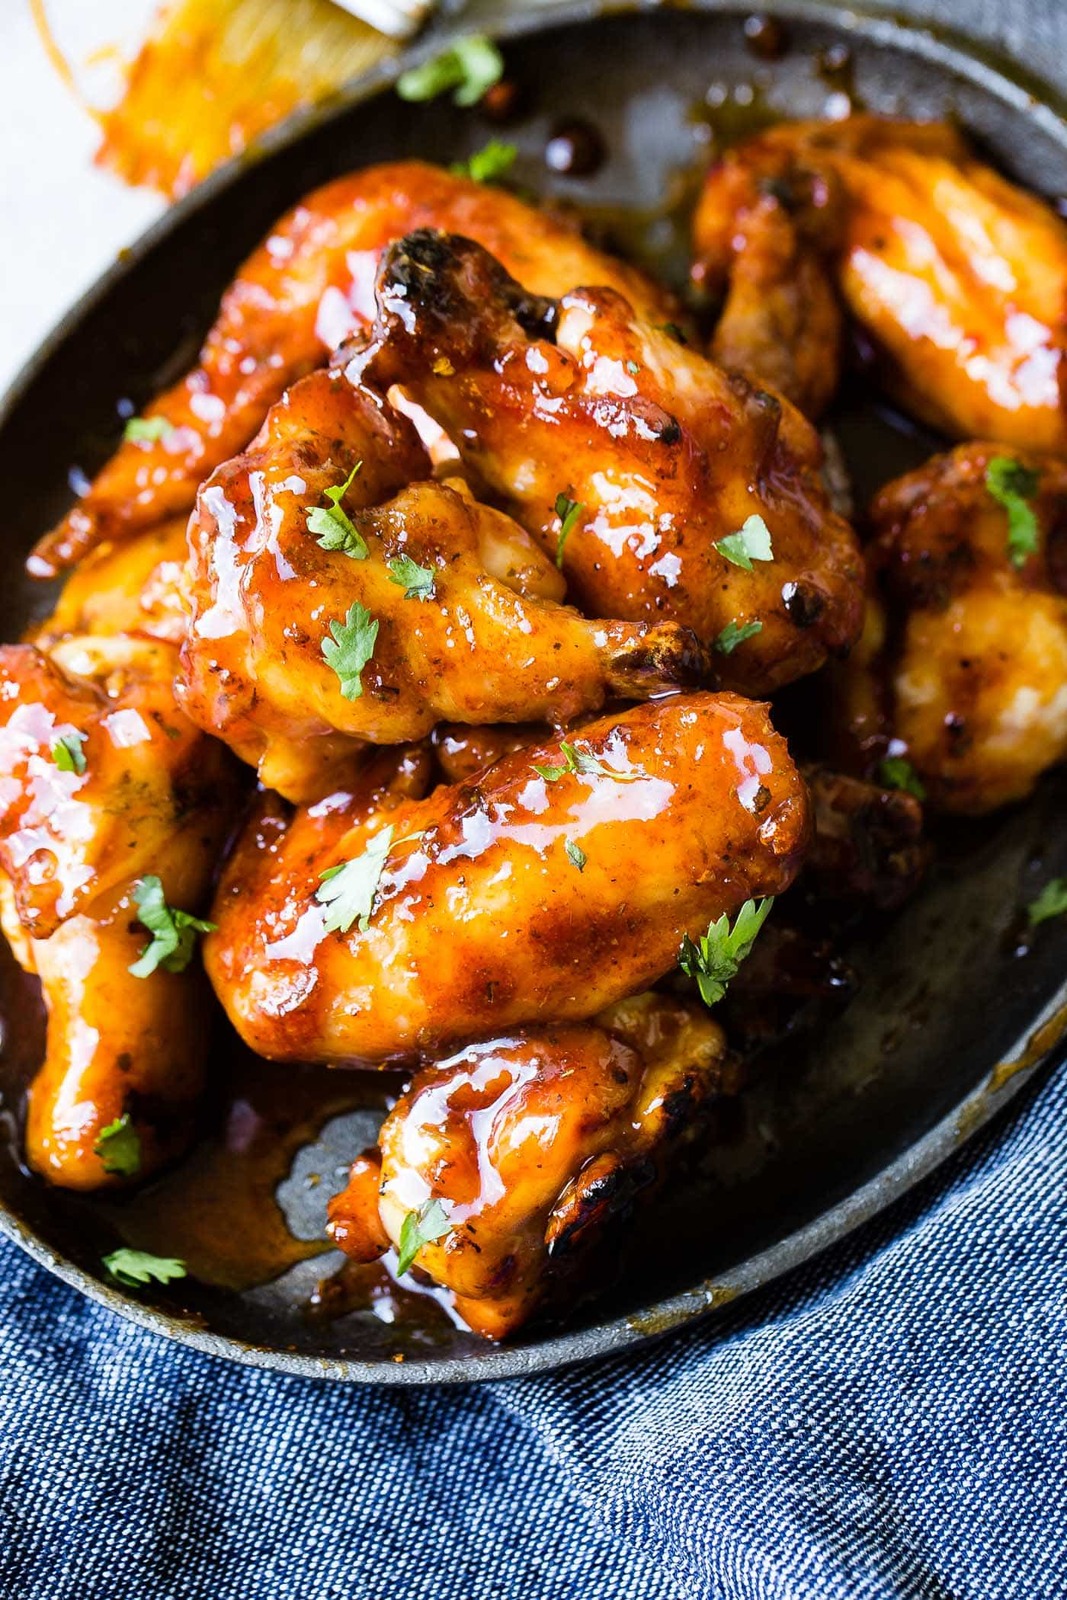 ticky-glazed-smoked-chicken-wings-on-the-traeger-6.jpg